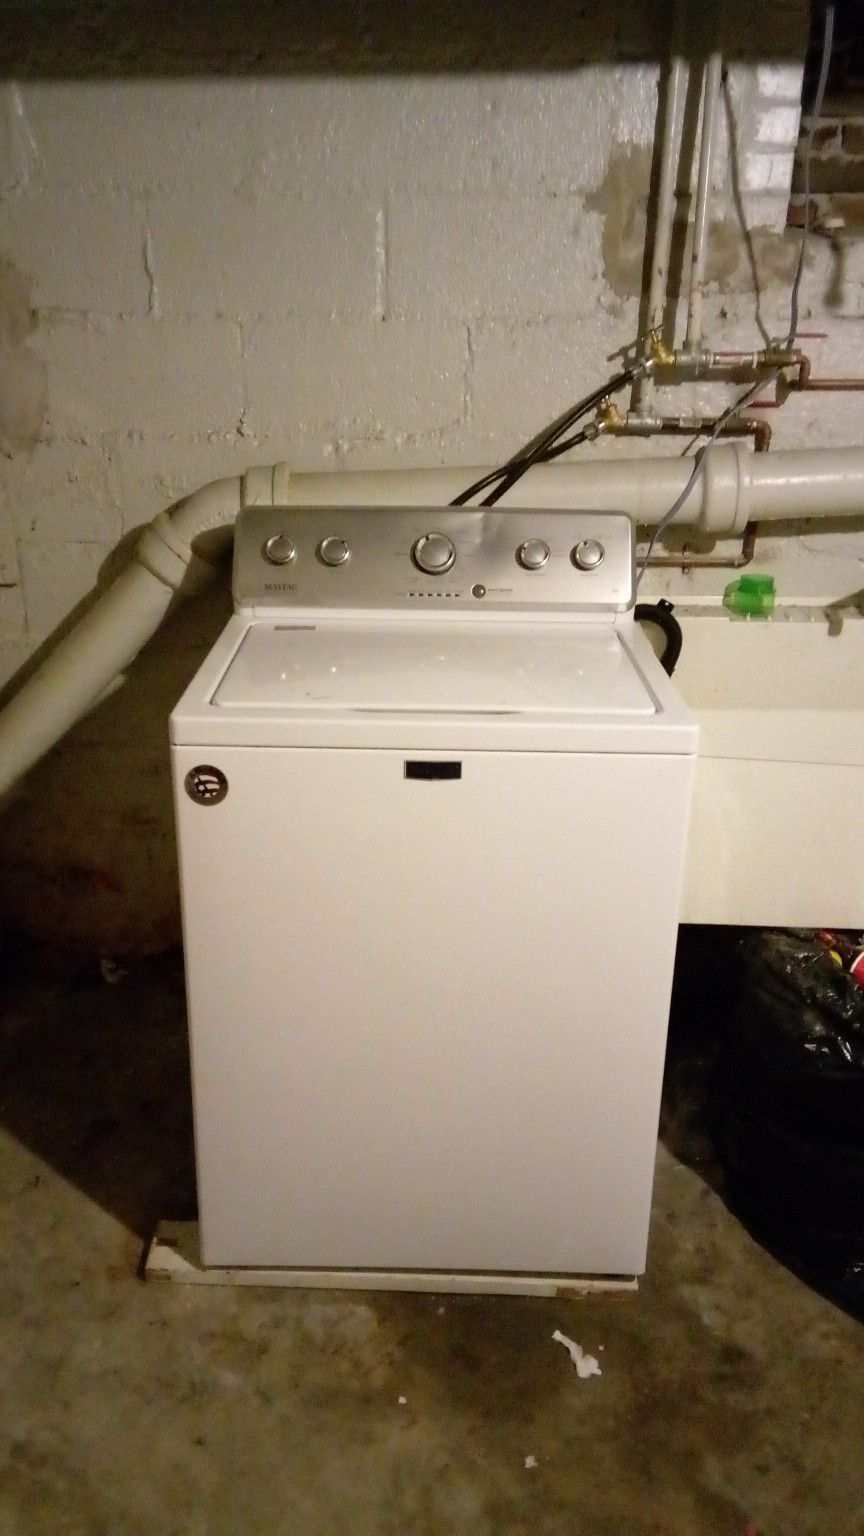 Maytag Washer Only One And A Half Years Old And I'm Selling A Dryer Kenmore 5 Years Old Both In Great shape Final Price $250 For Both Eviction Sale